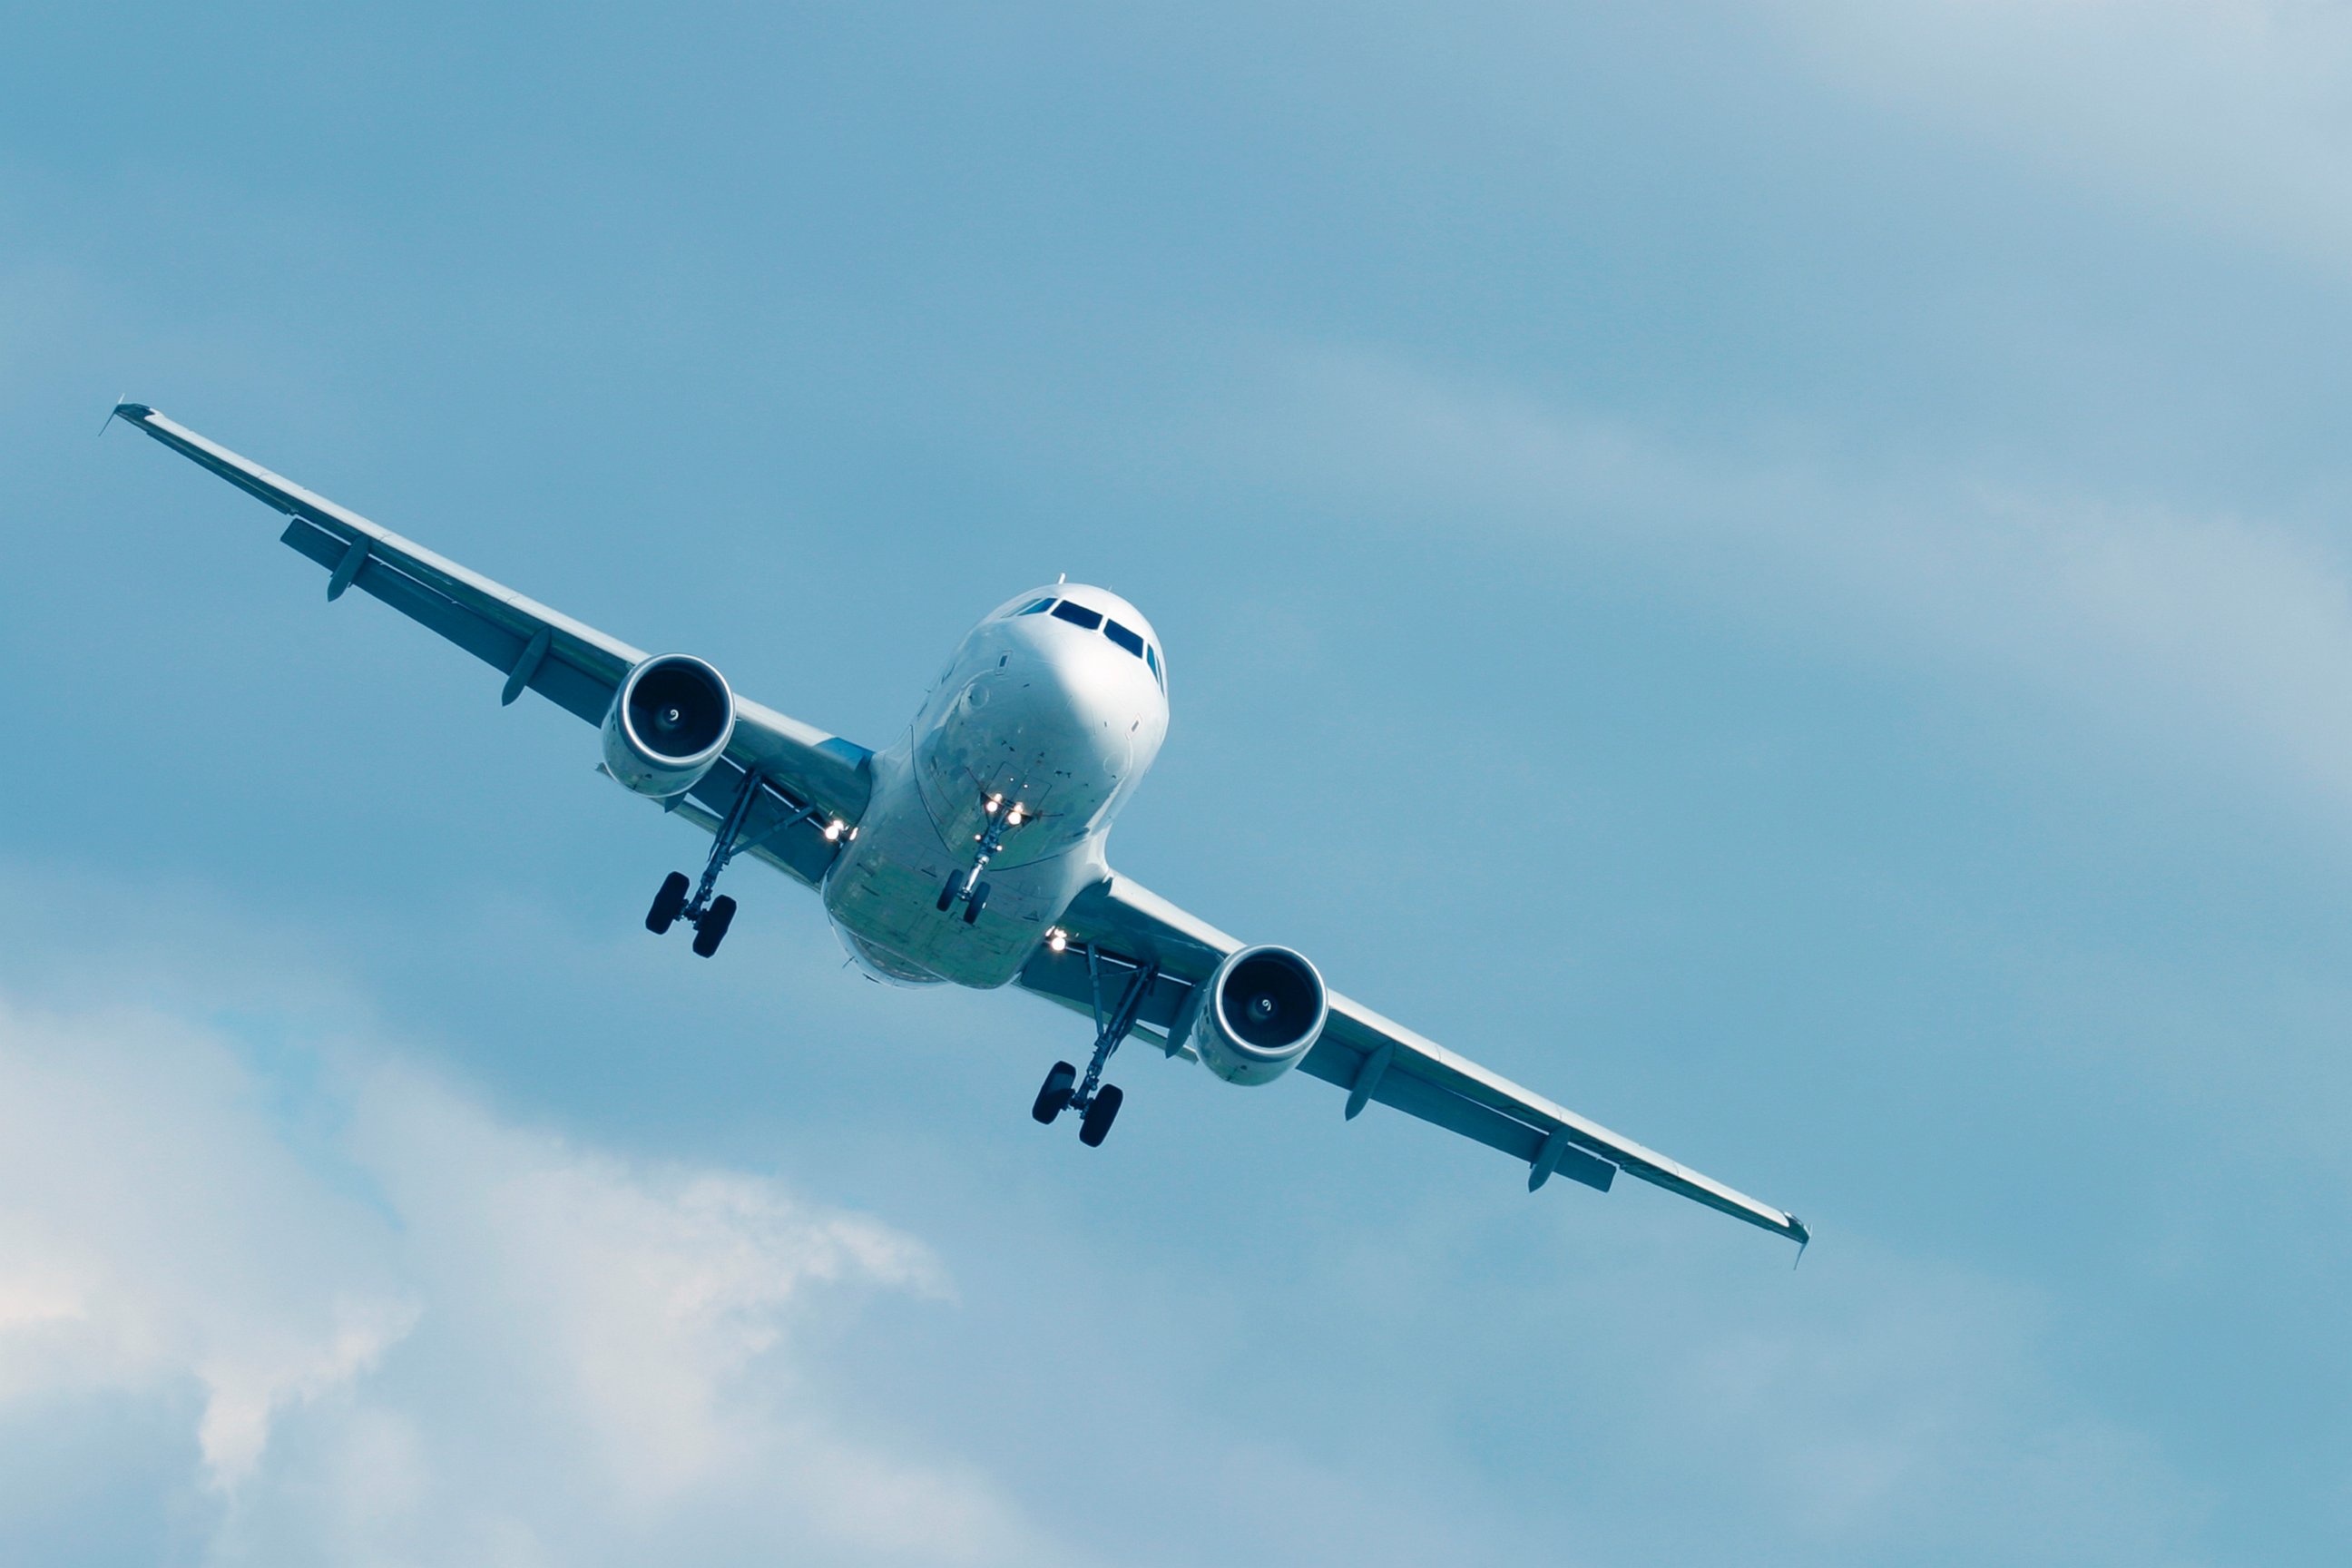 PHOTO: A plane prepares to land in this stock photo.